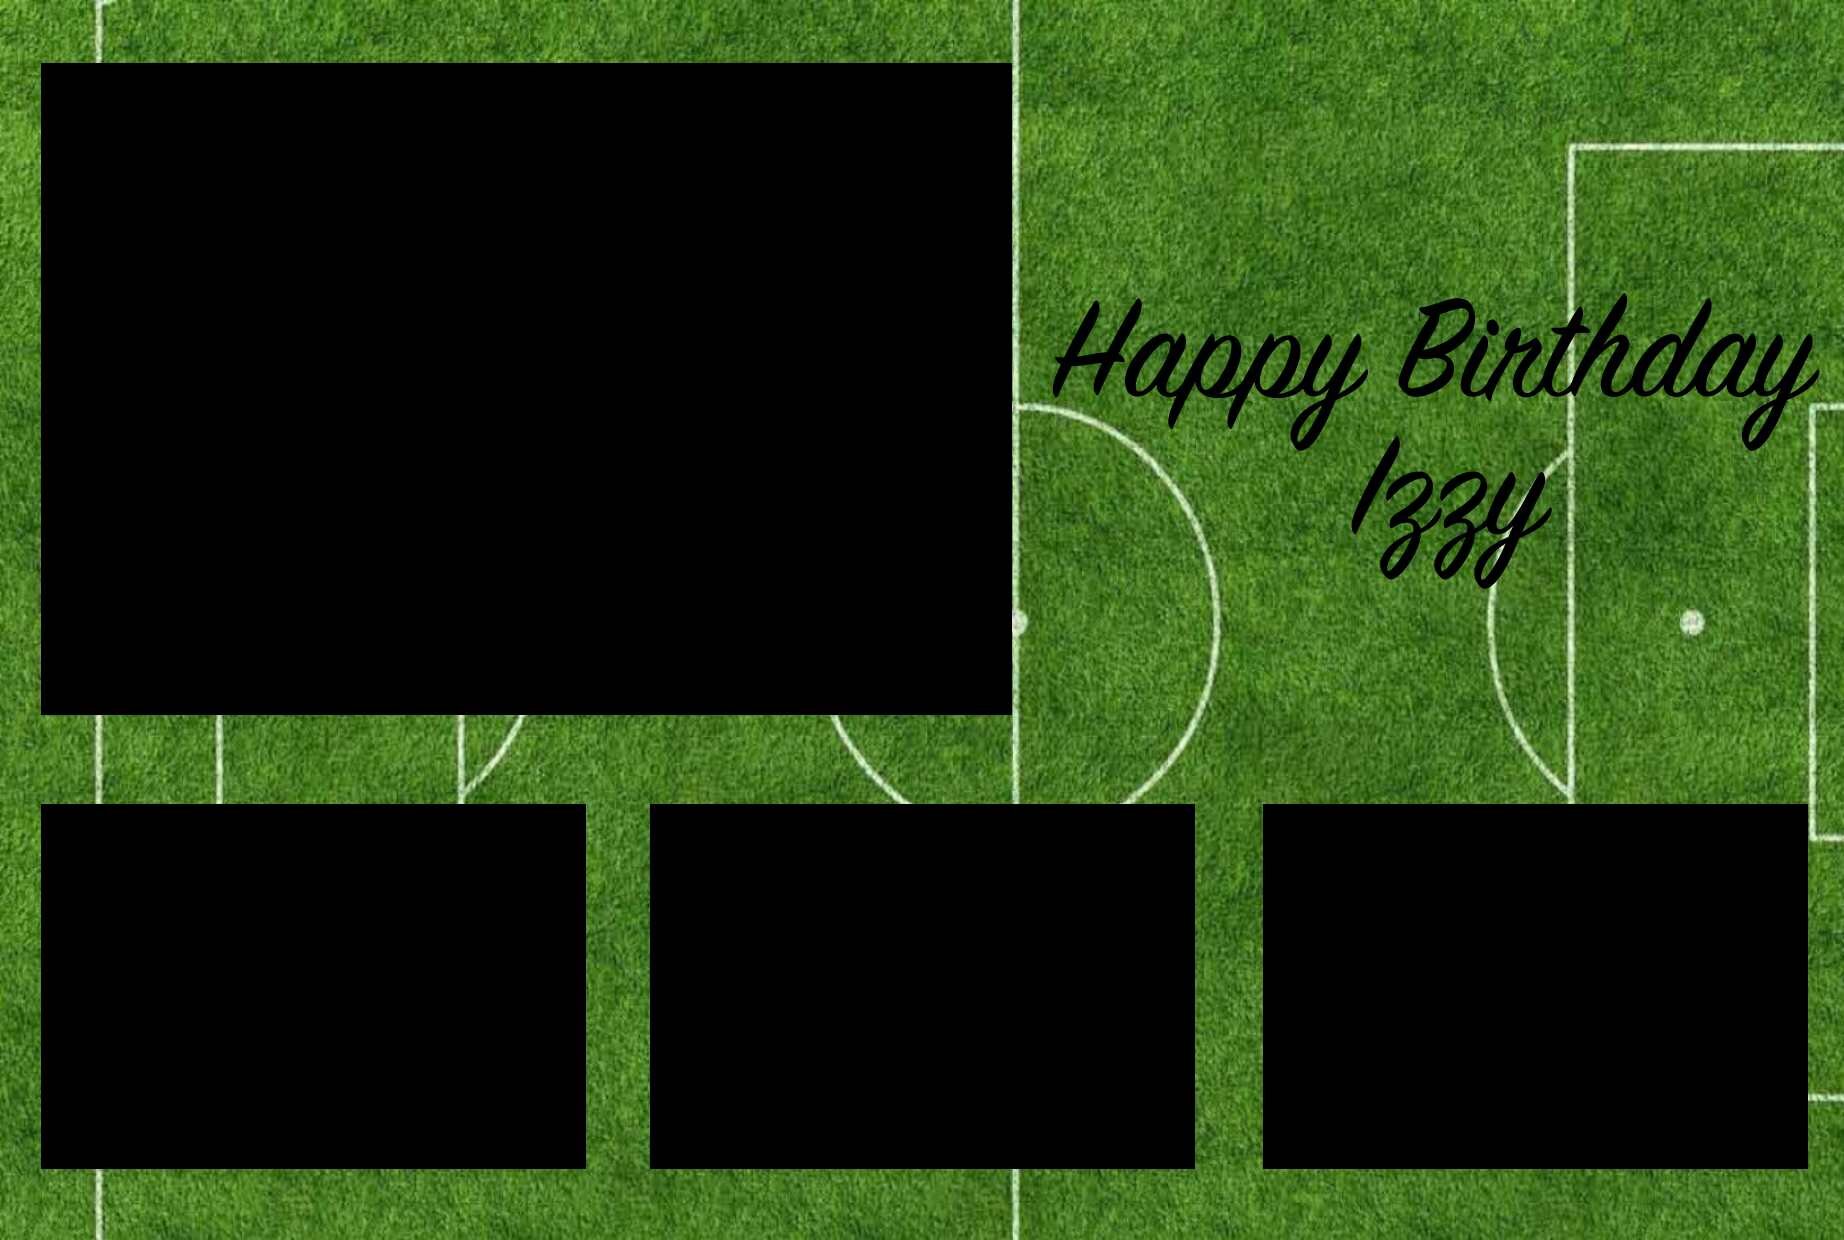 Football themed photo booth template